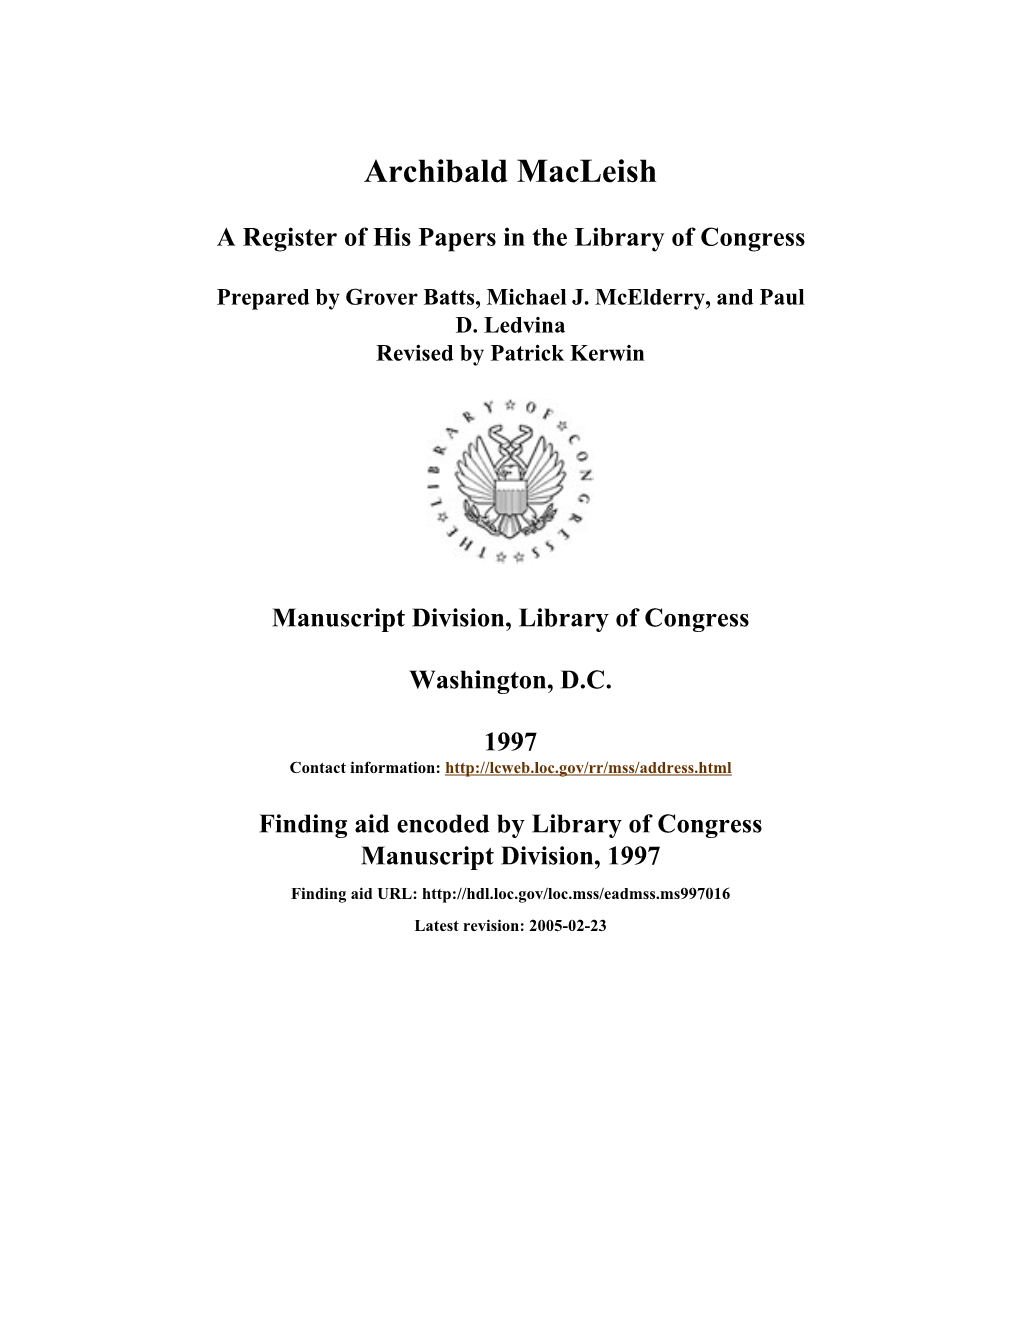 Papers of Archibald Macleish